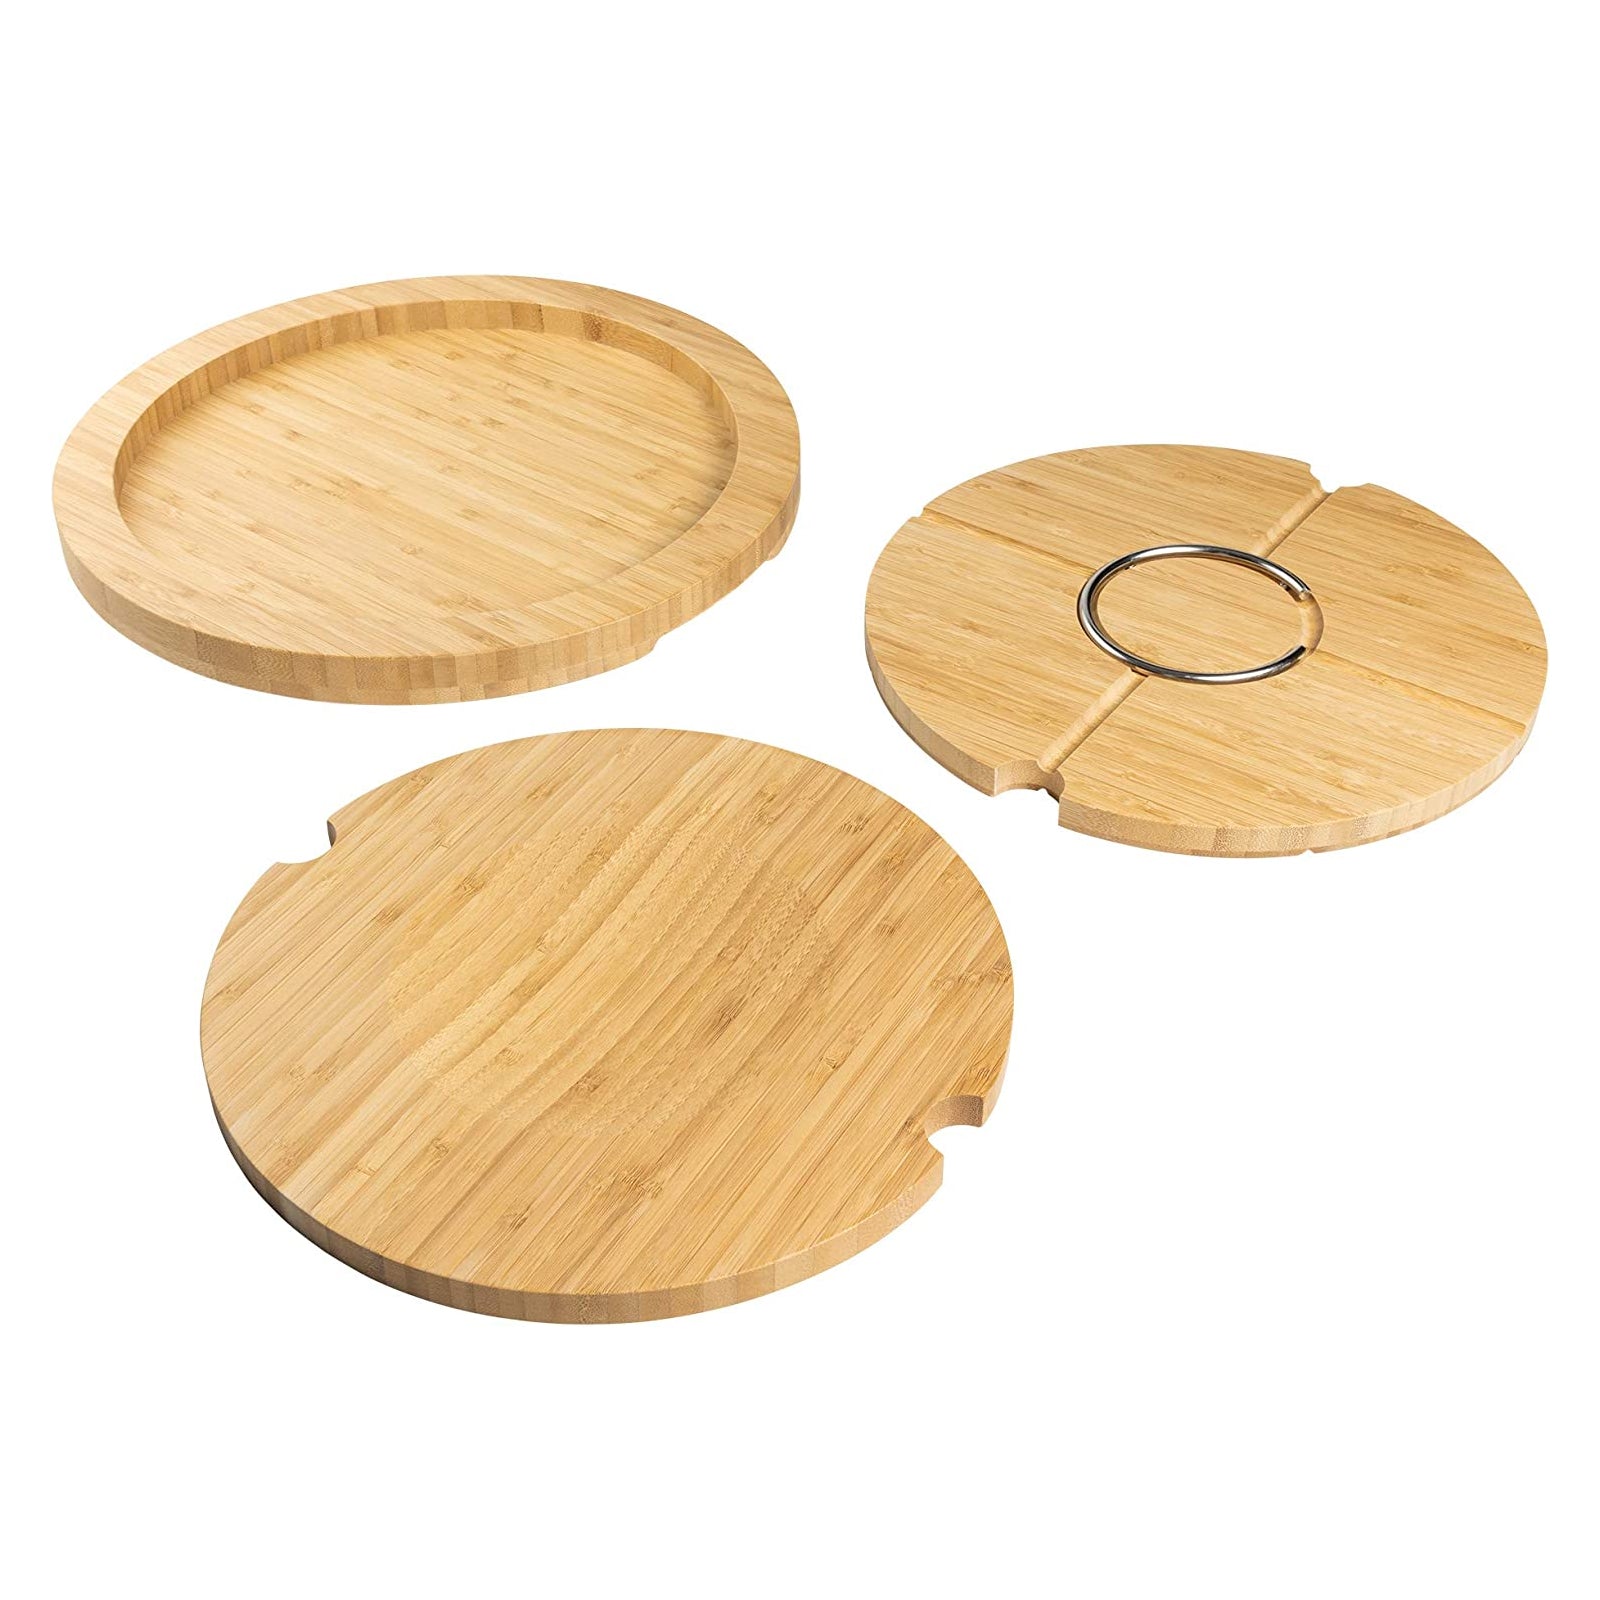  Rockingham Forest Chopping Board, Wood: Home & Kitchen